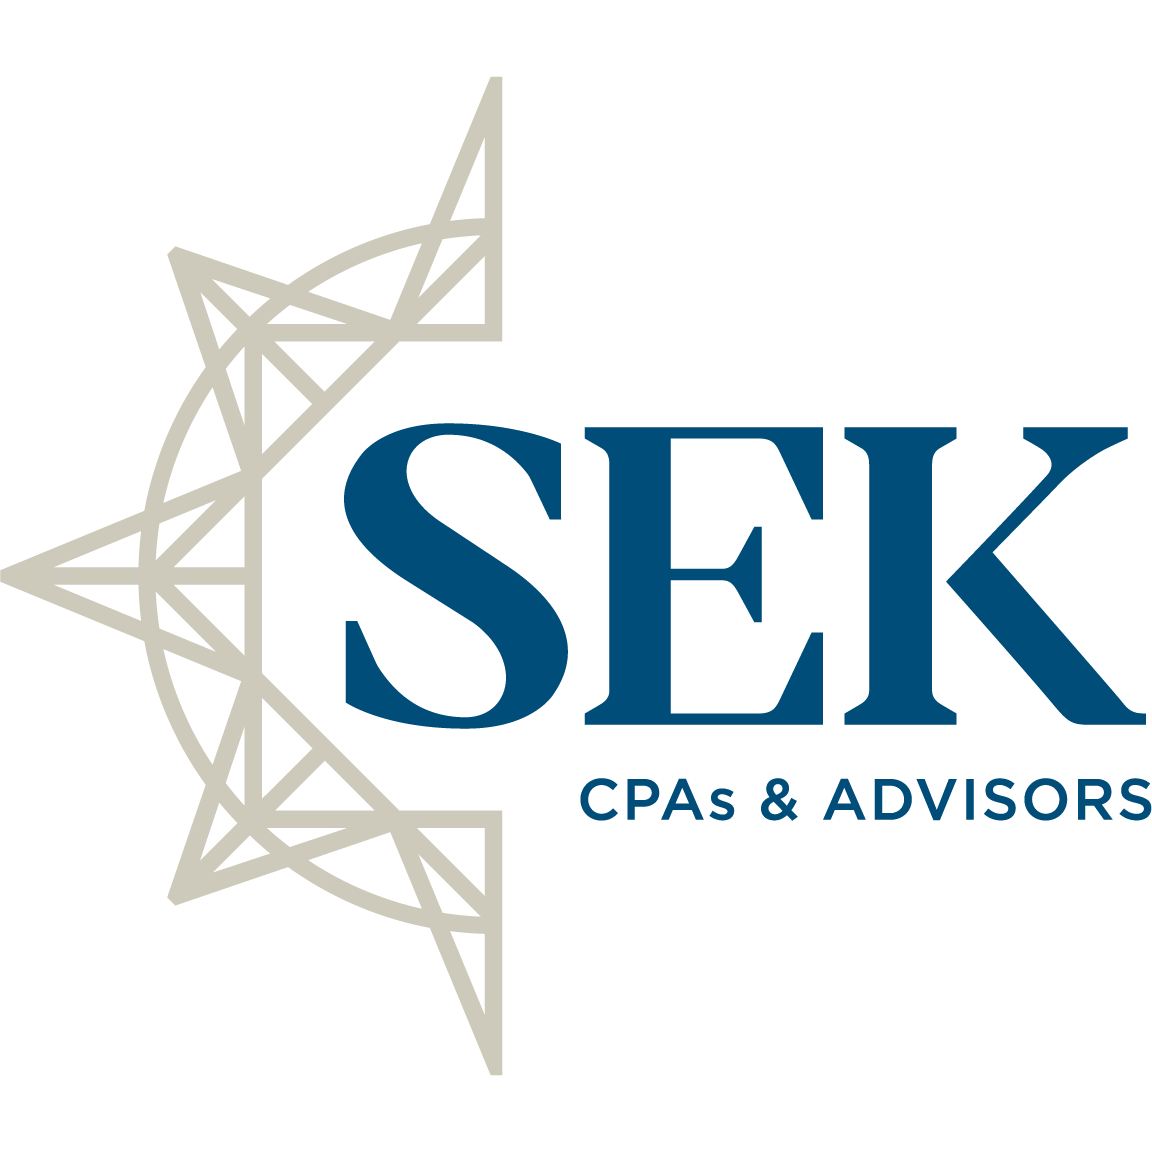 SEK, CPAs & Advisors - Hagerstown, MD 21742 - (301)733-5020 | ShowMeLocal.com